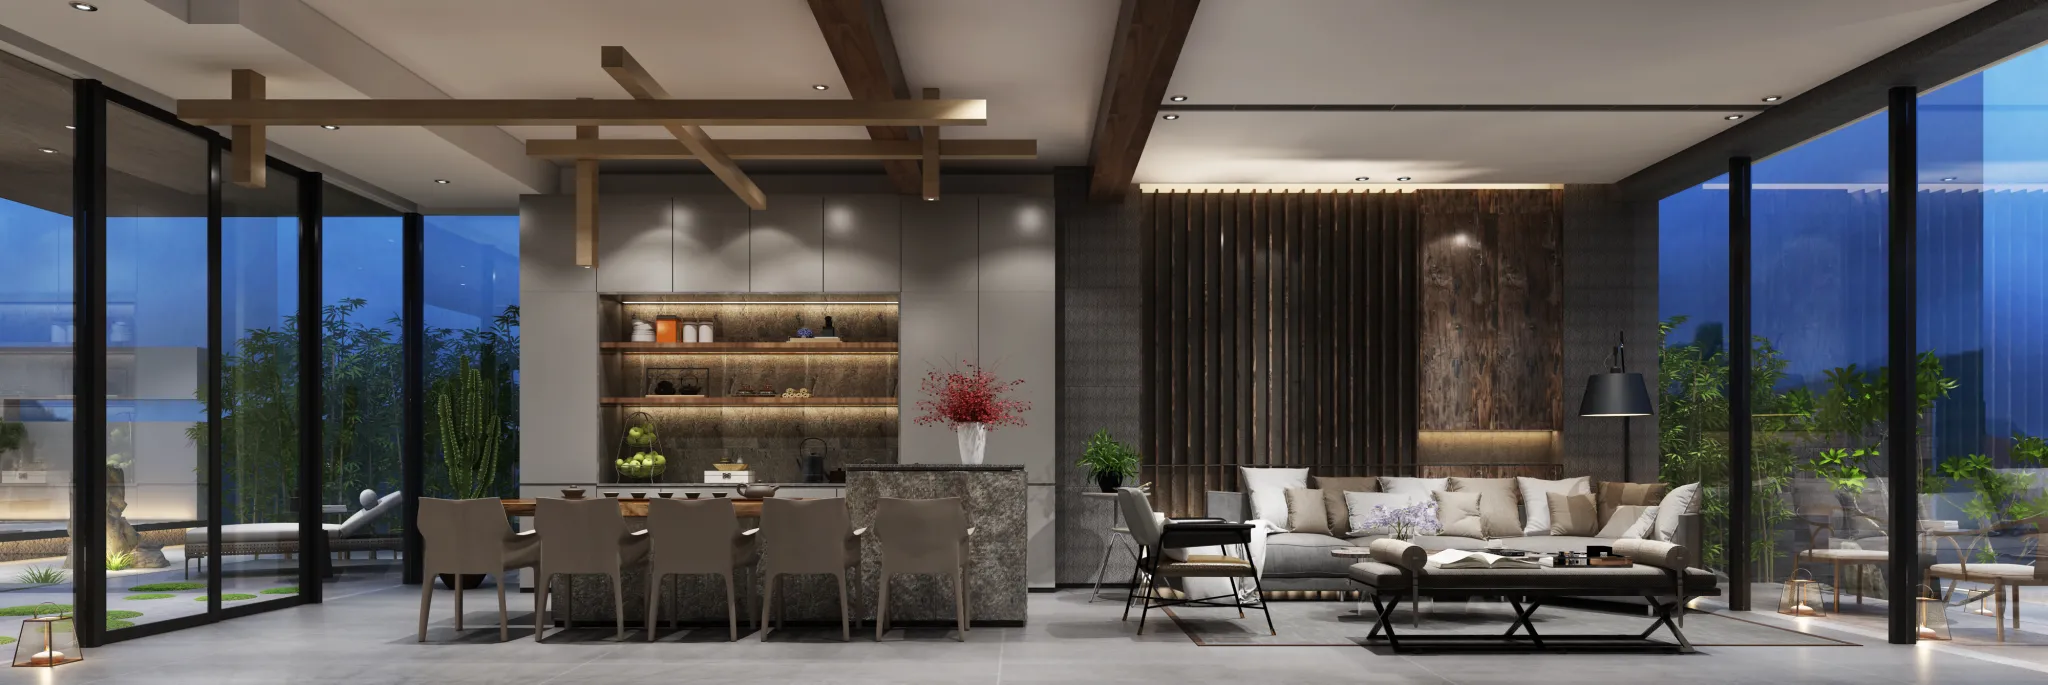 DESMOD INTERIOR 2021 (VRAY) – 4. LIVING ROOM – CHINESE – 043